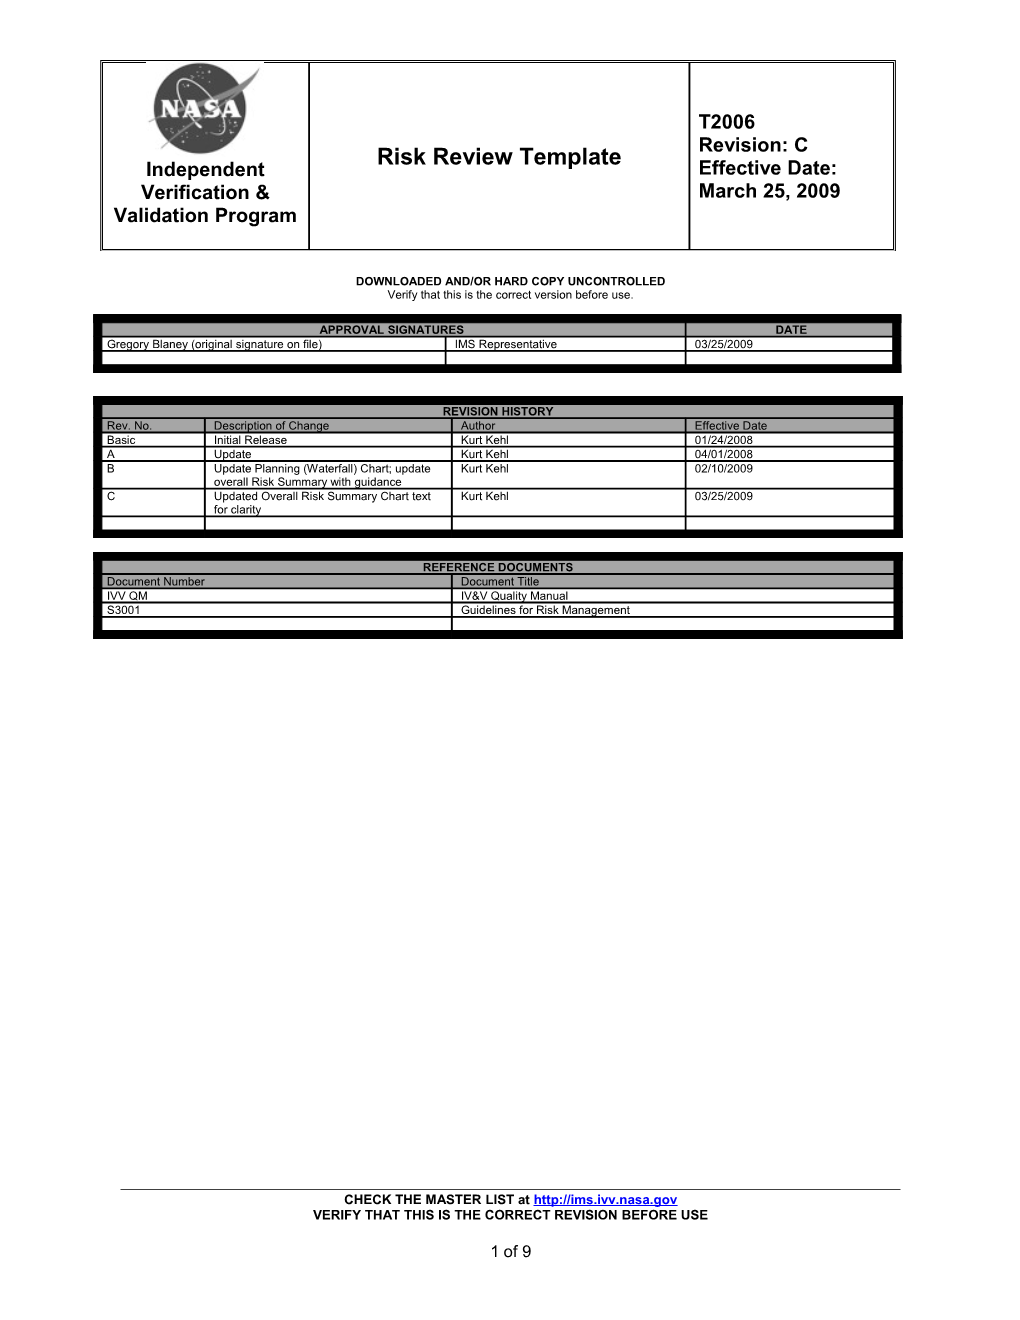 Risk Review Template